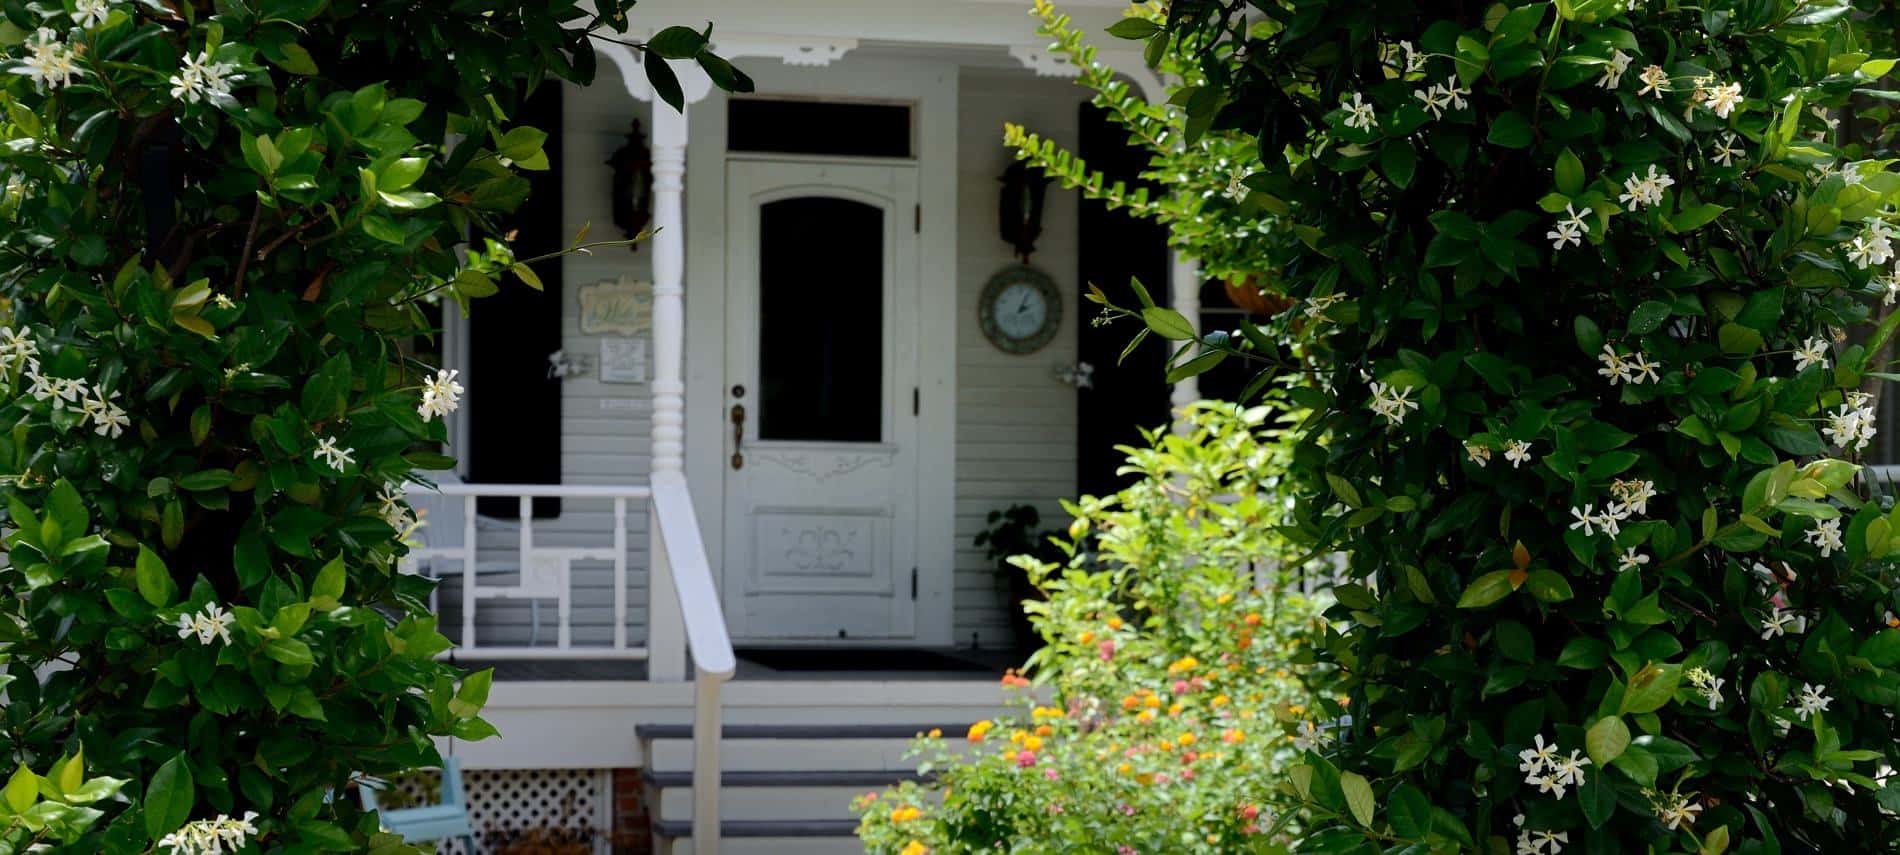 Magnolia Cottage: Black and White Painted Steps